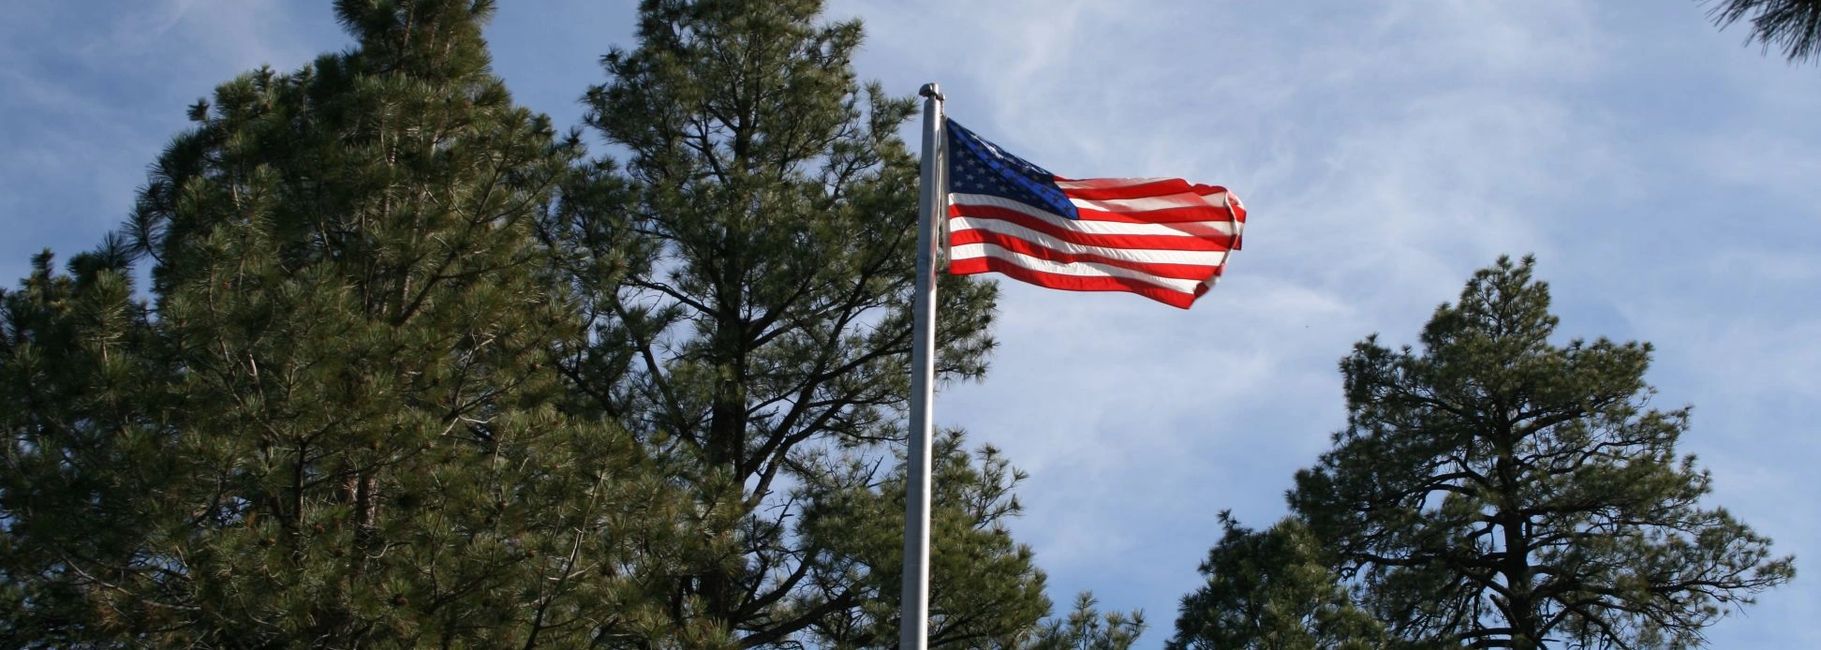 Trees and US Flag in front of blue sky